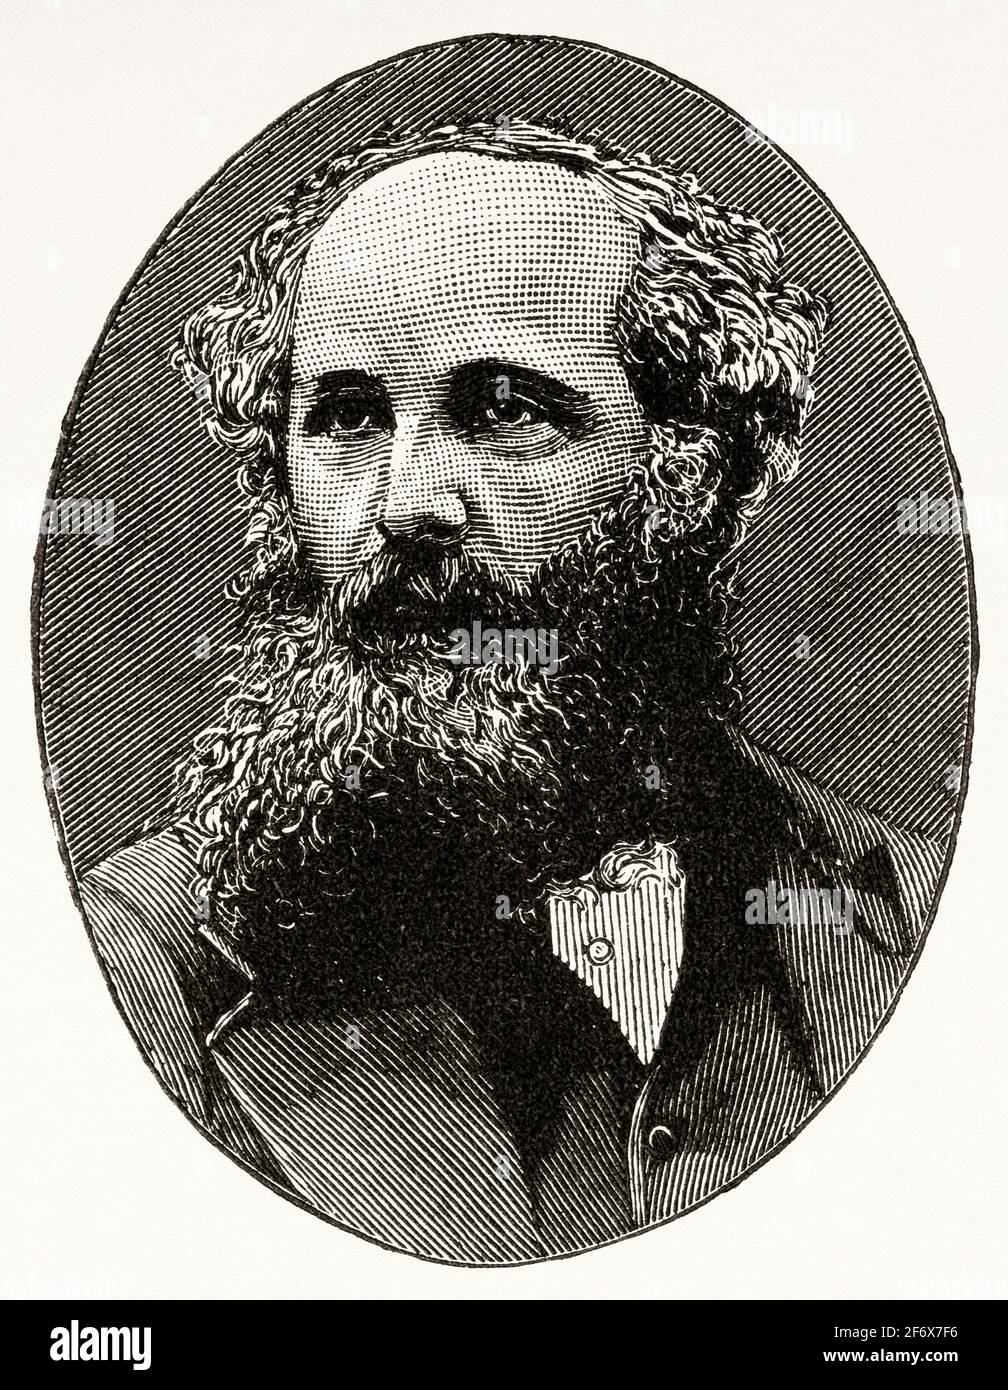 Portrait of James Clerk Maxwell (1831-1879) Scottish scientist in the field of mathematical physics.Notable achievement was to formulate the classical theory of electromagnetic radiation. United Kingdom, England. Europe Stock Photo